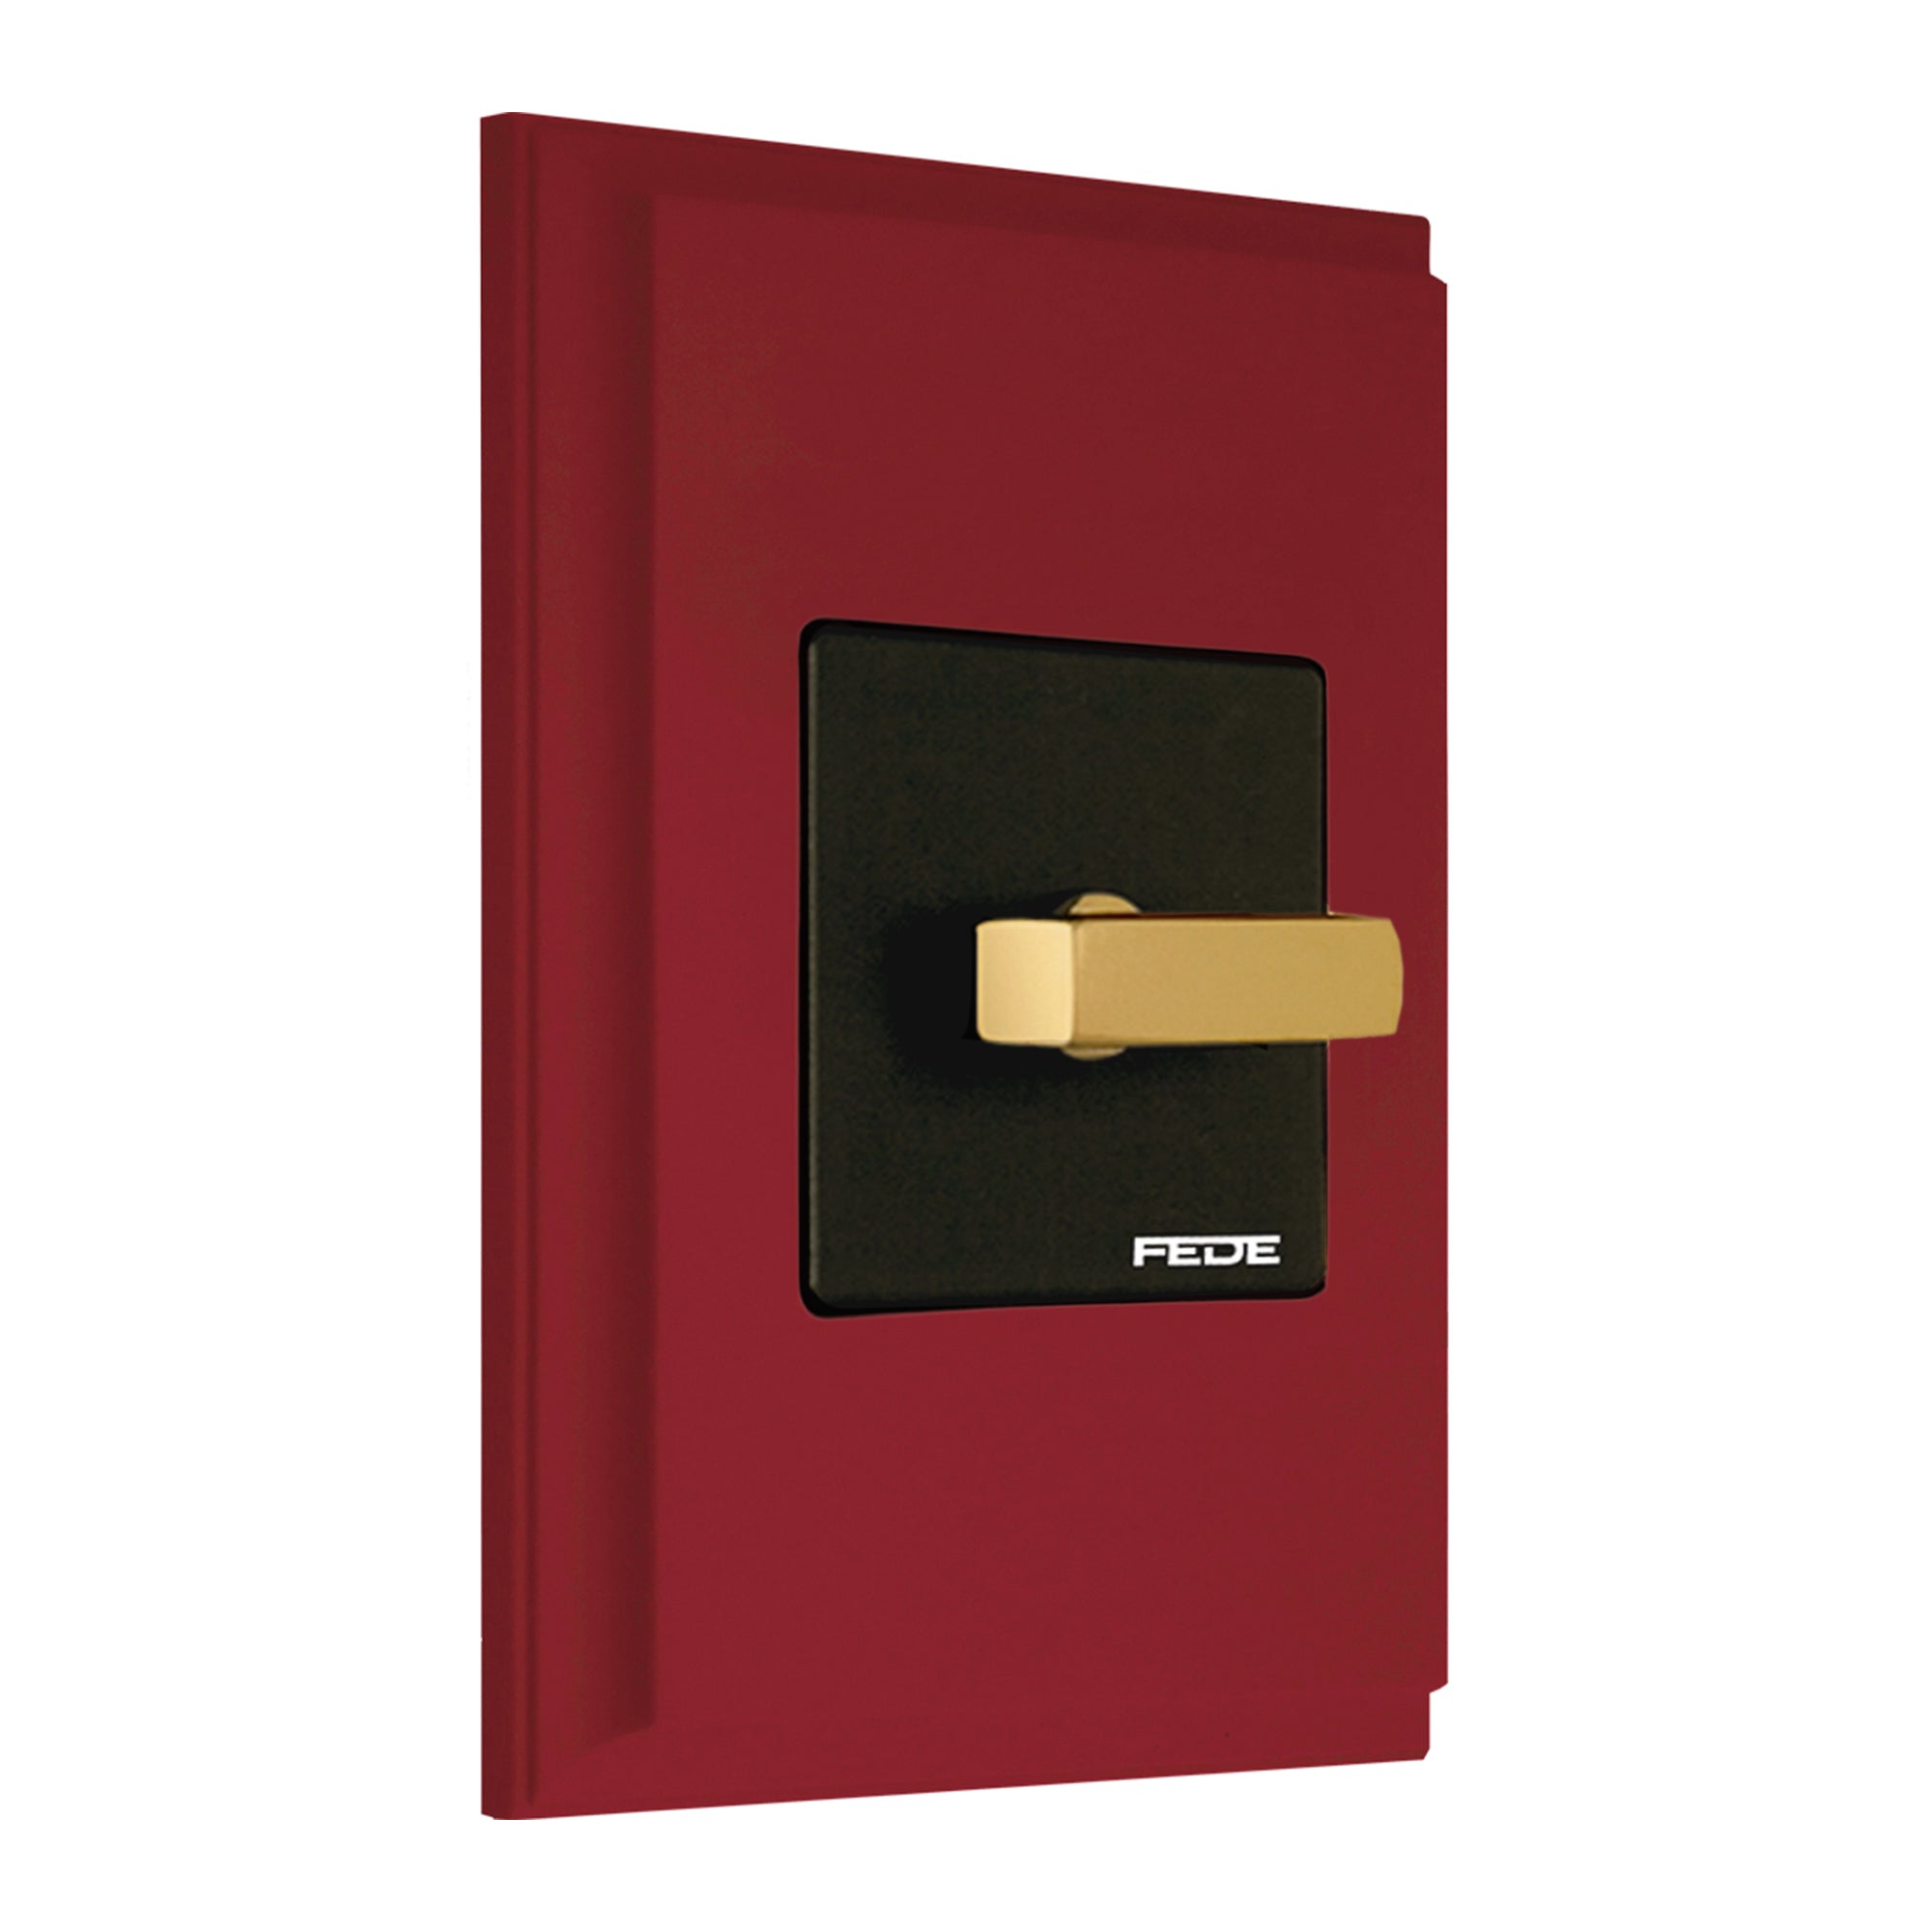 Marco rotary light switch